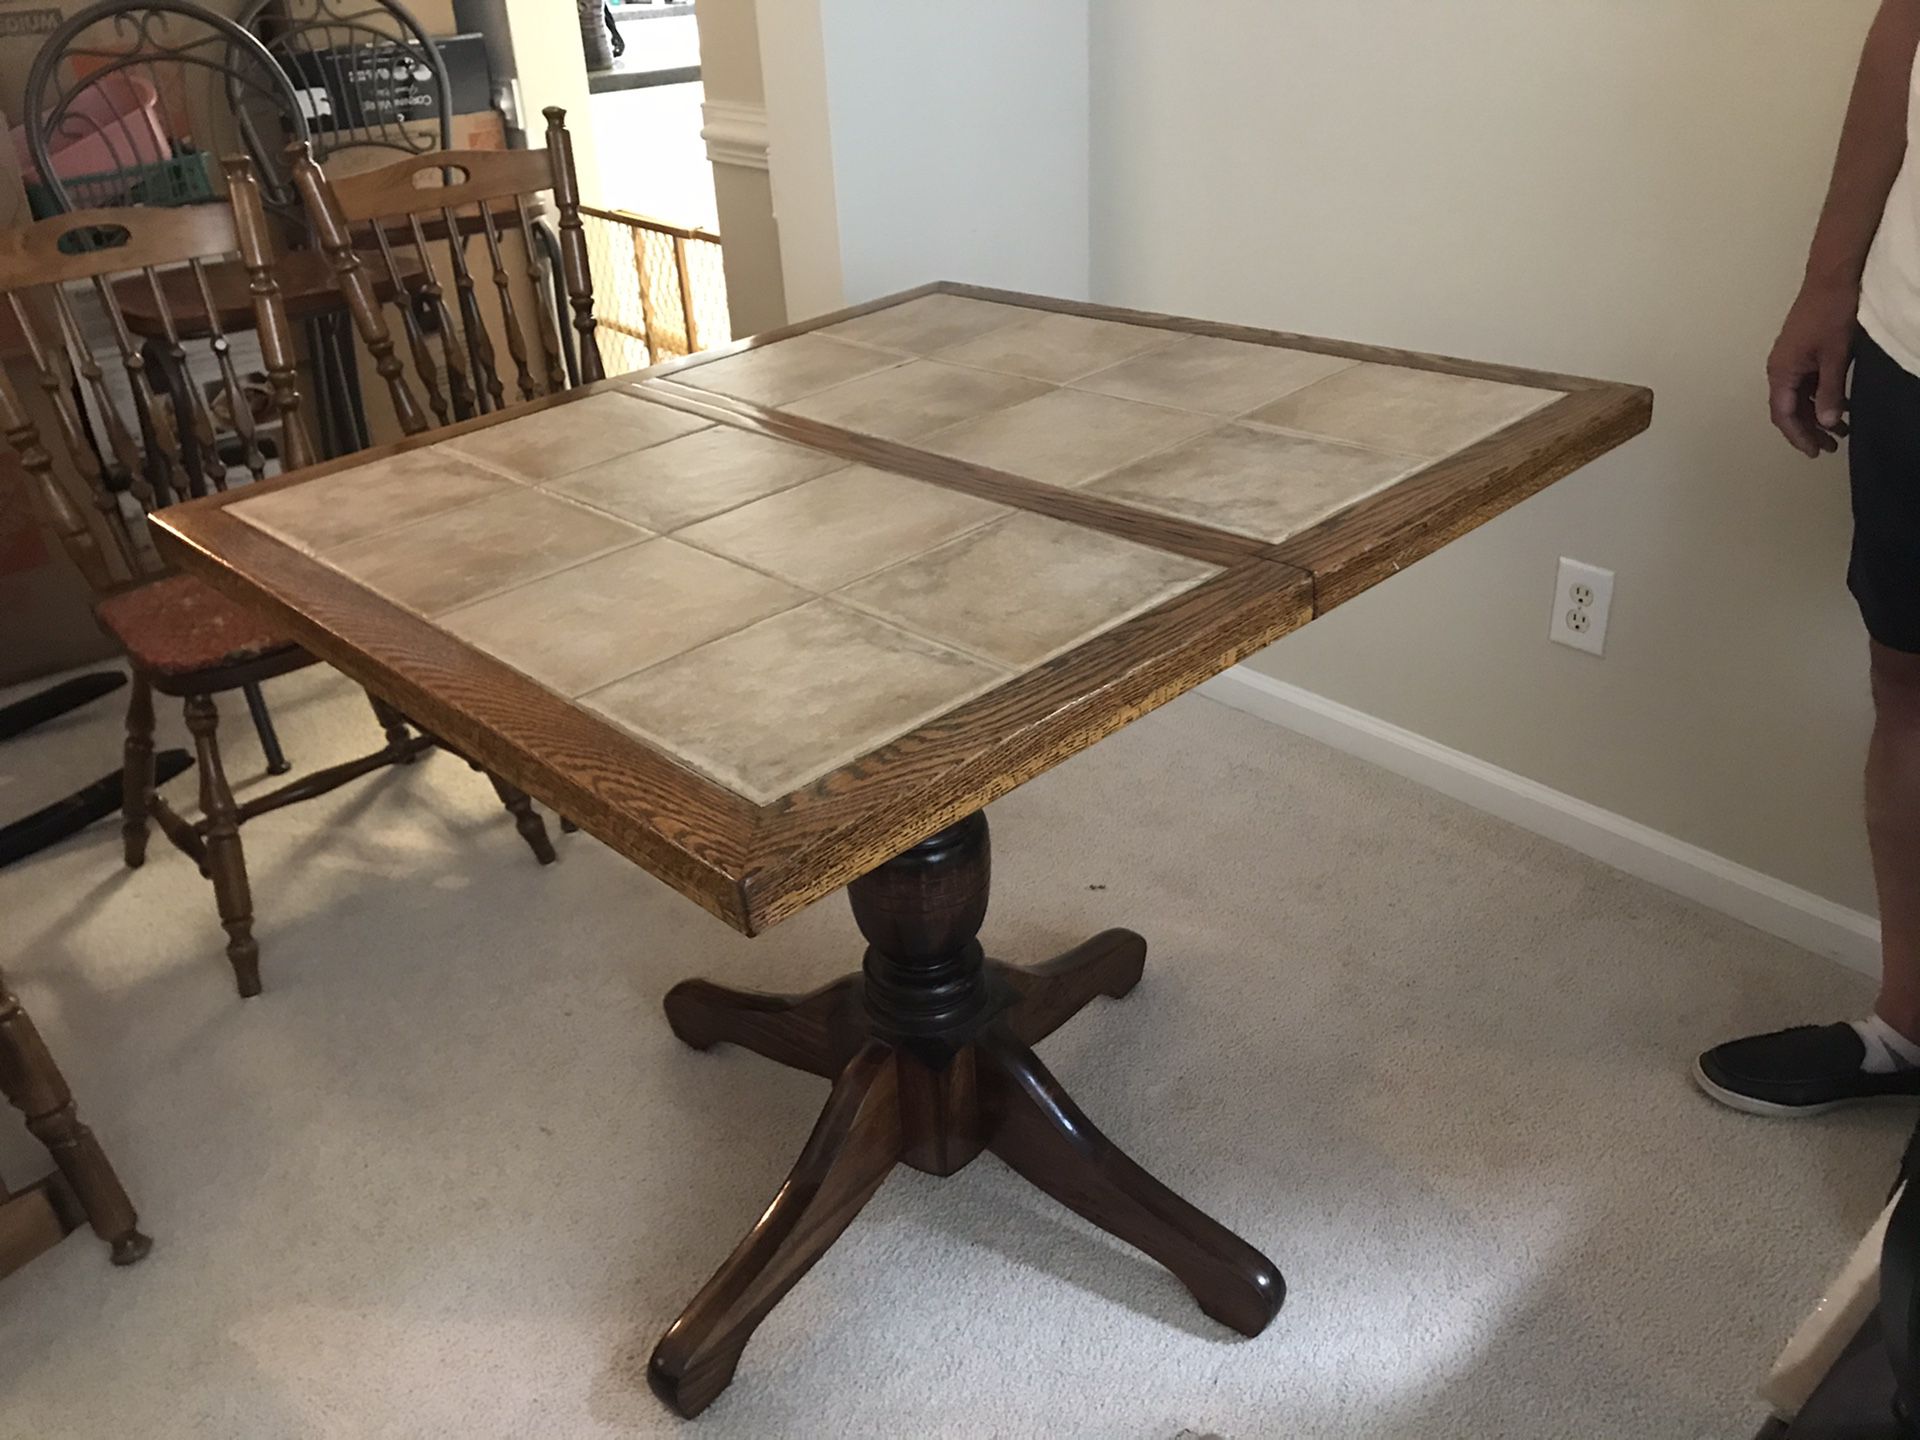 Kitchen table with leaf and 4 chairs